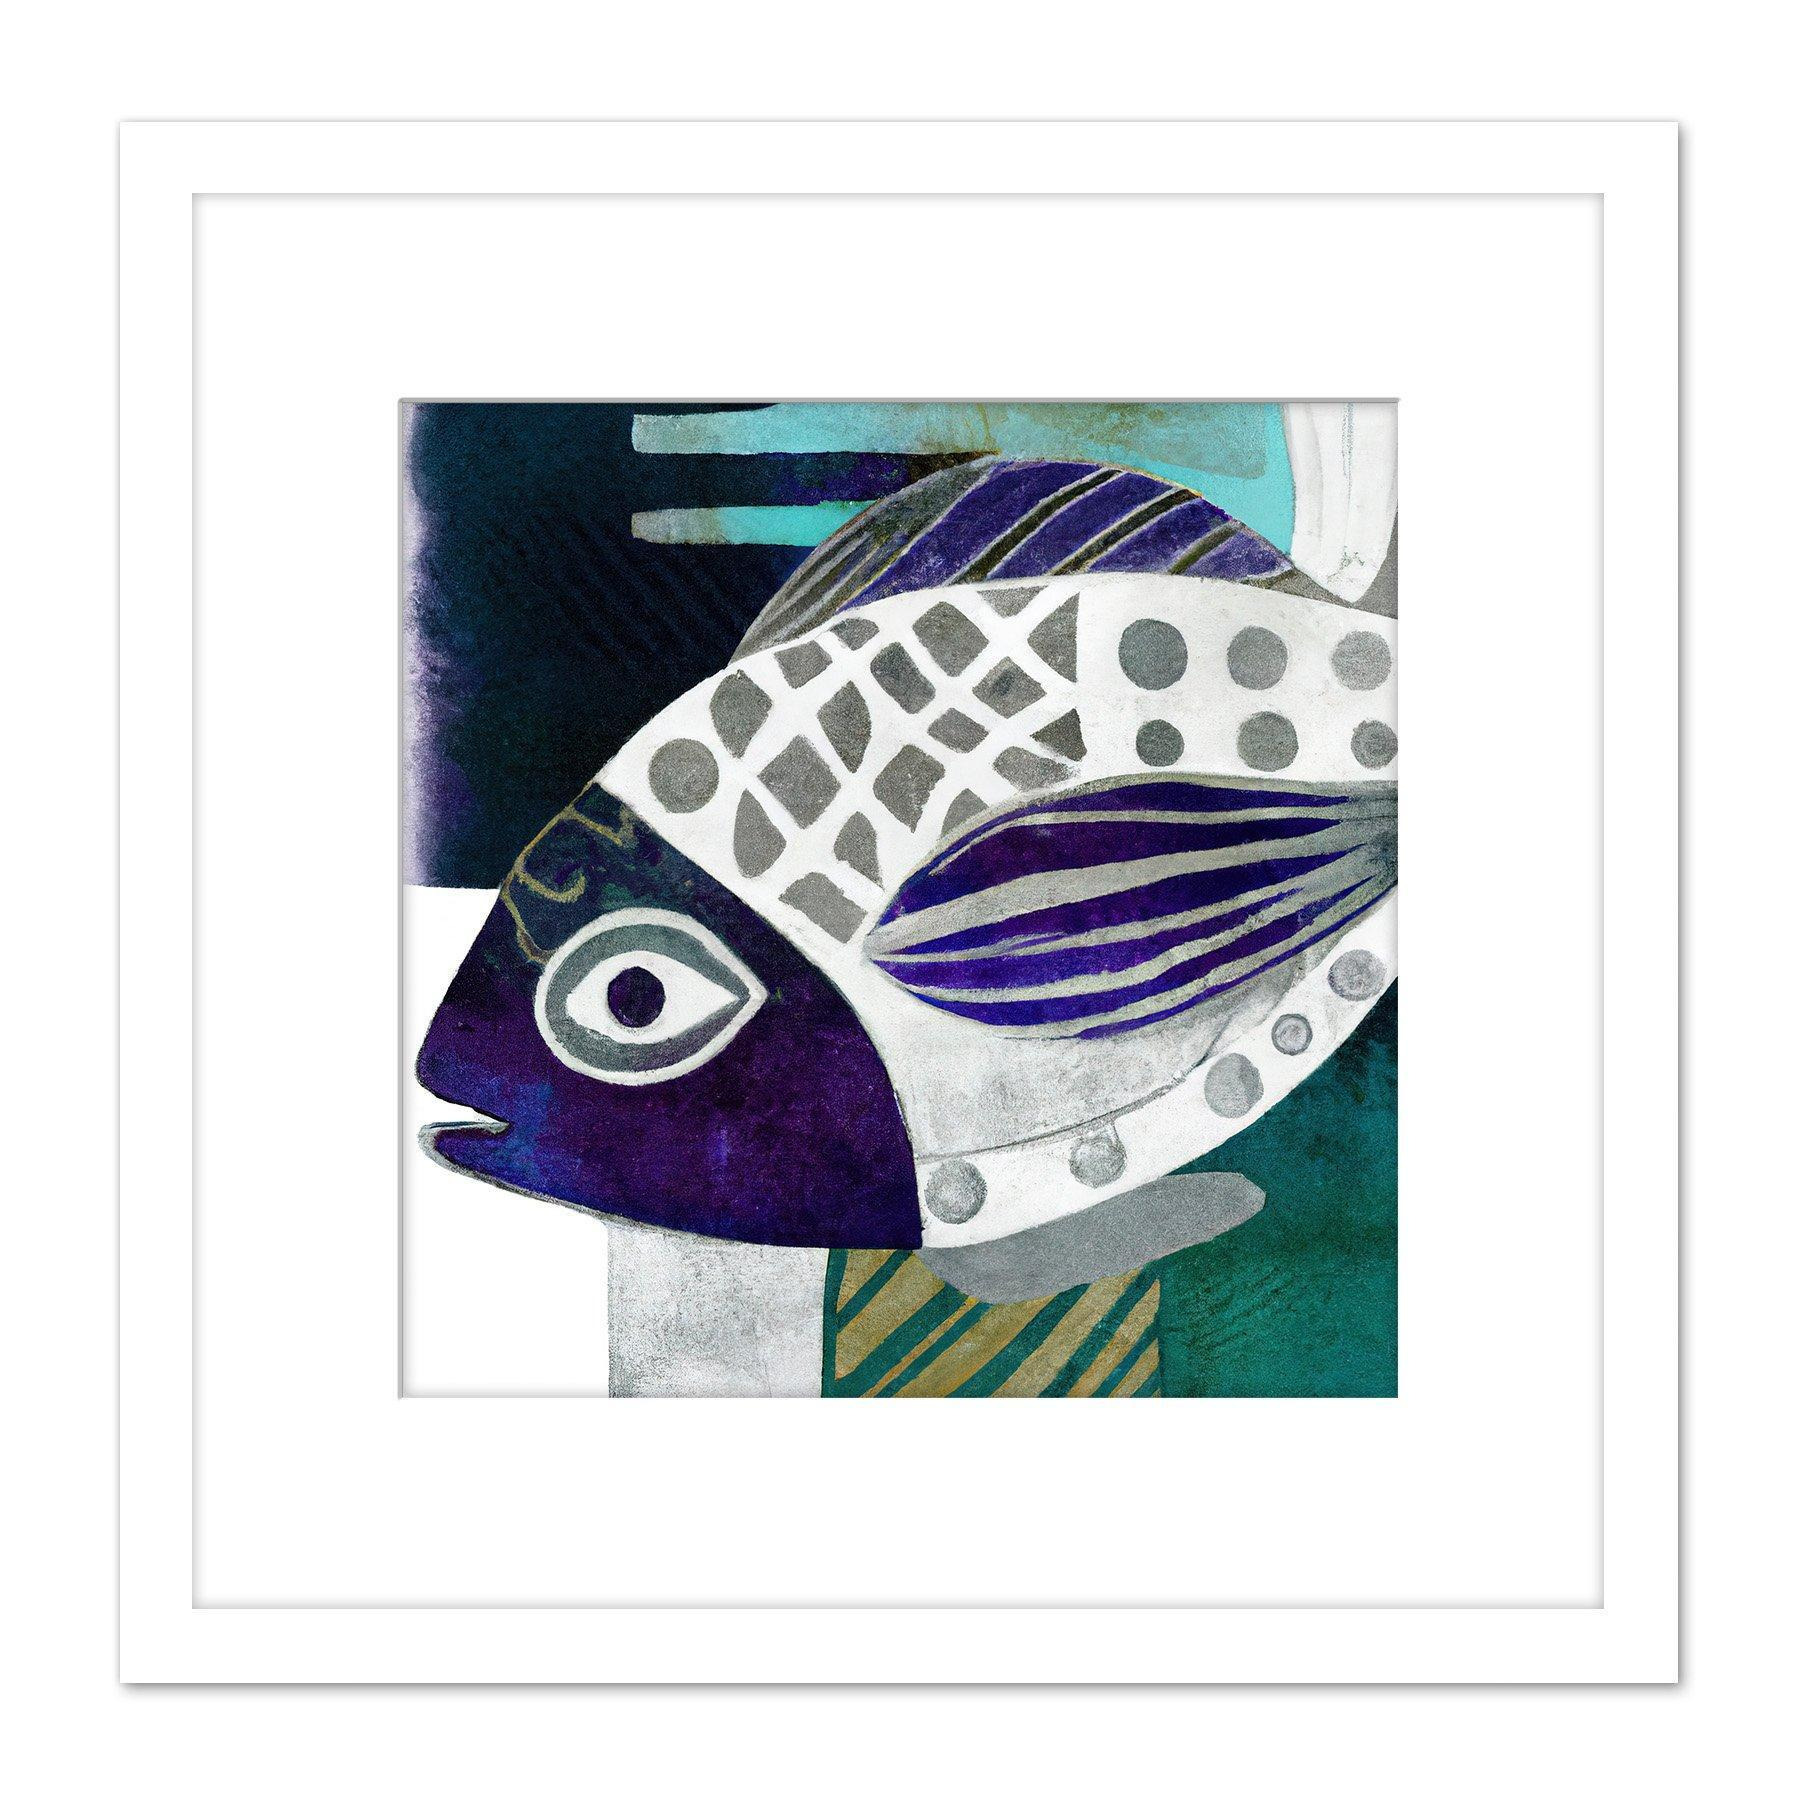 Abstract Fish Watercolour Sketch Illustration Purple Silver Patterns Square Wooden Framed Wall Art Print Picture 8X8 Inch - image 1